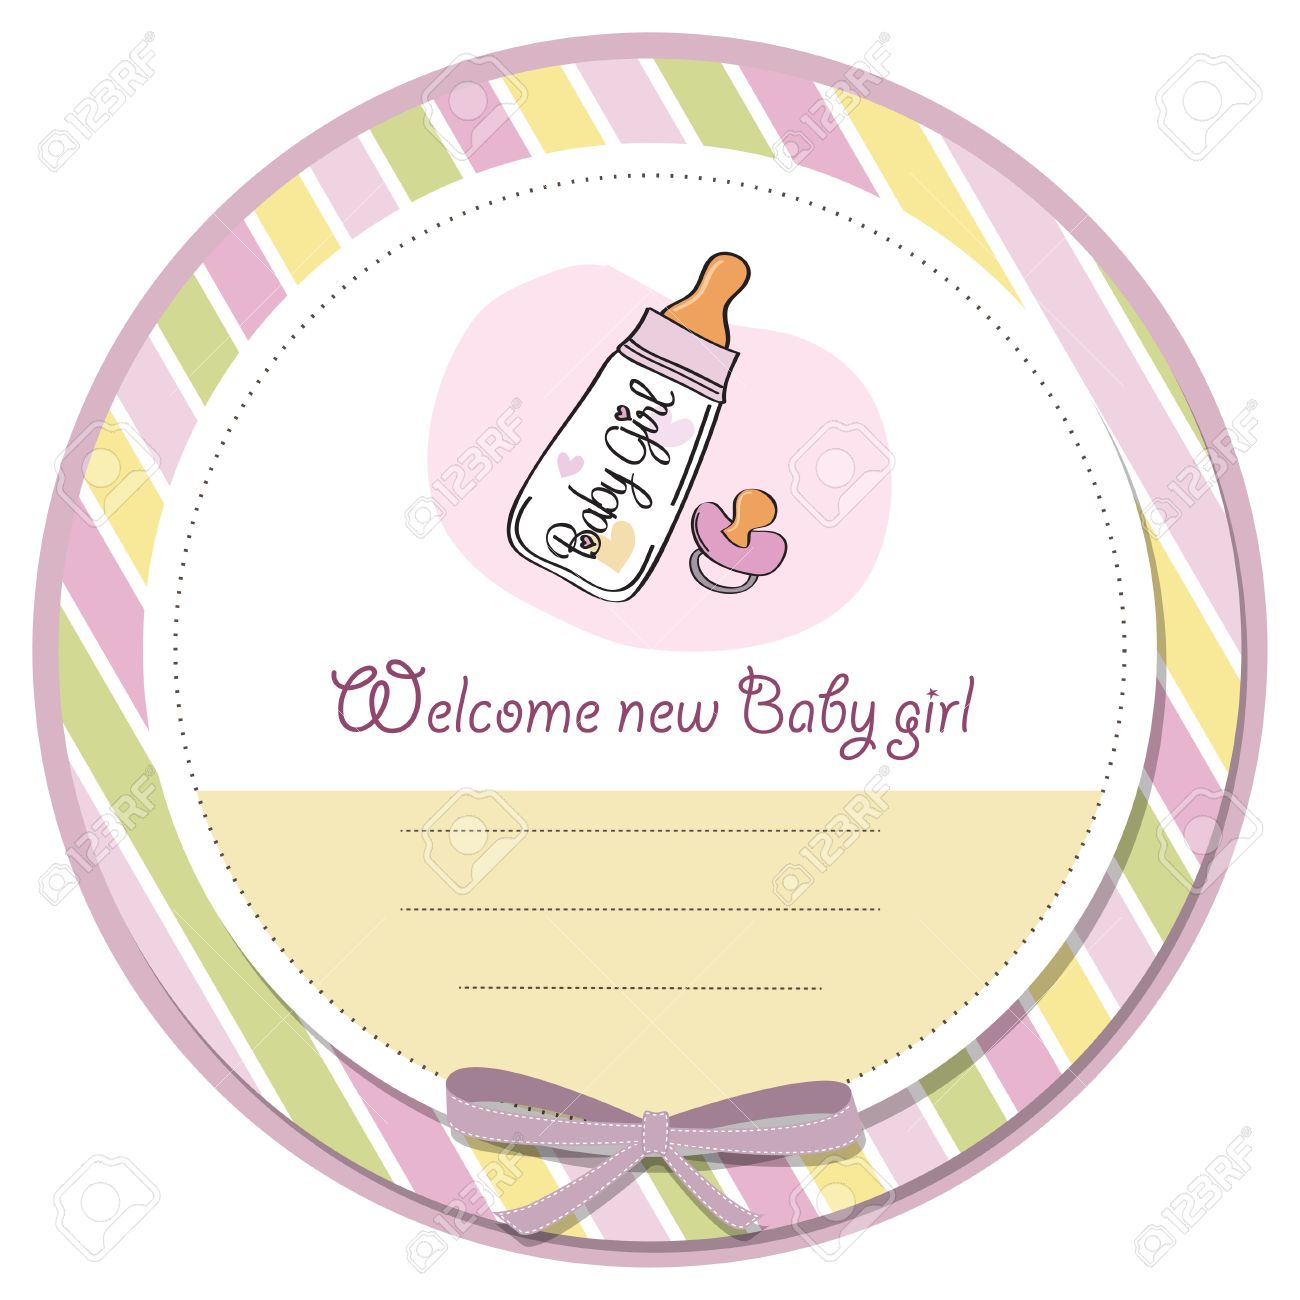 Welcome A New Baby Girl